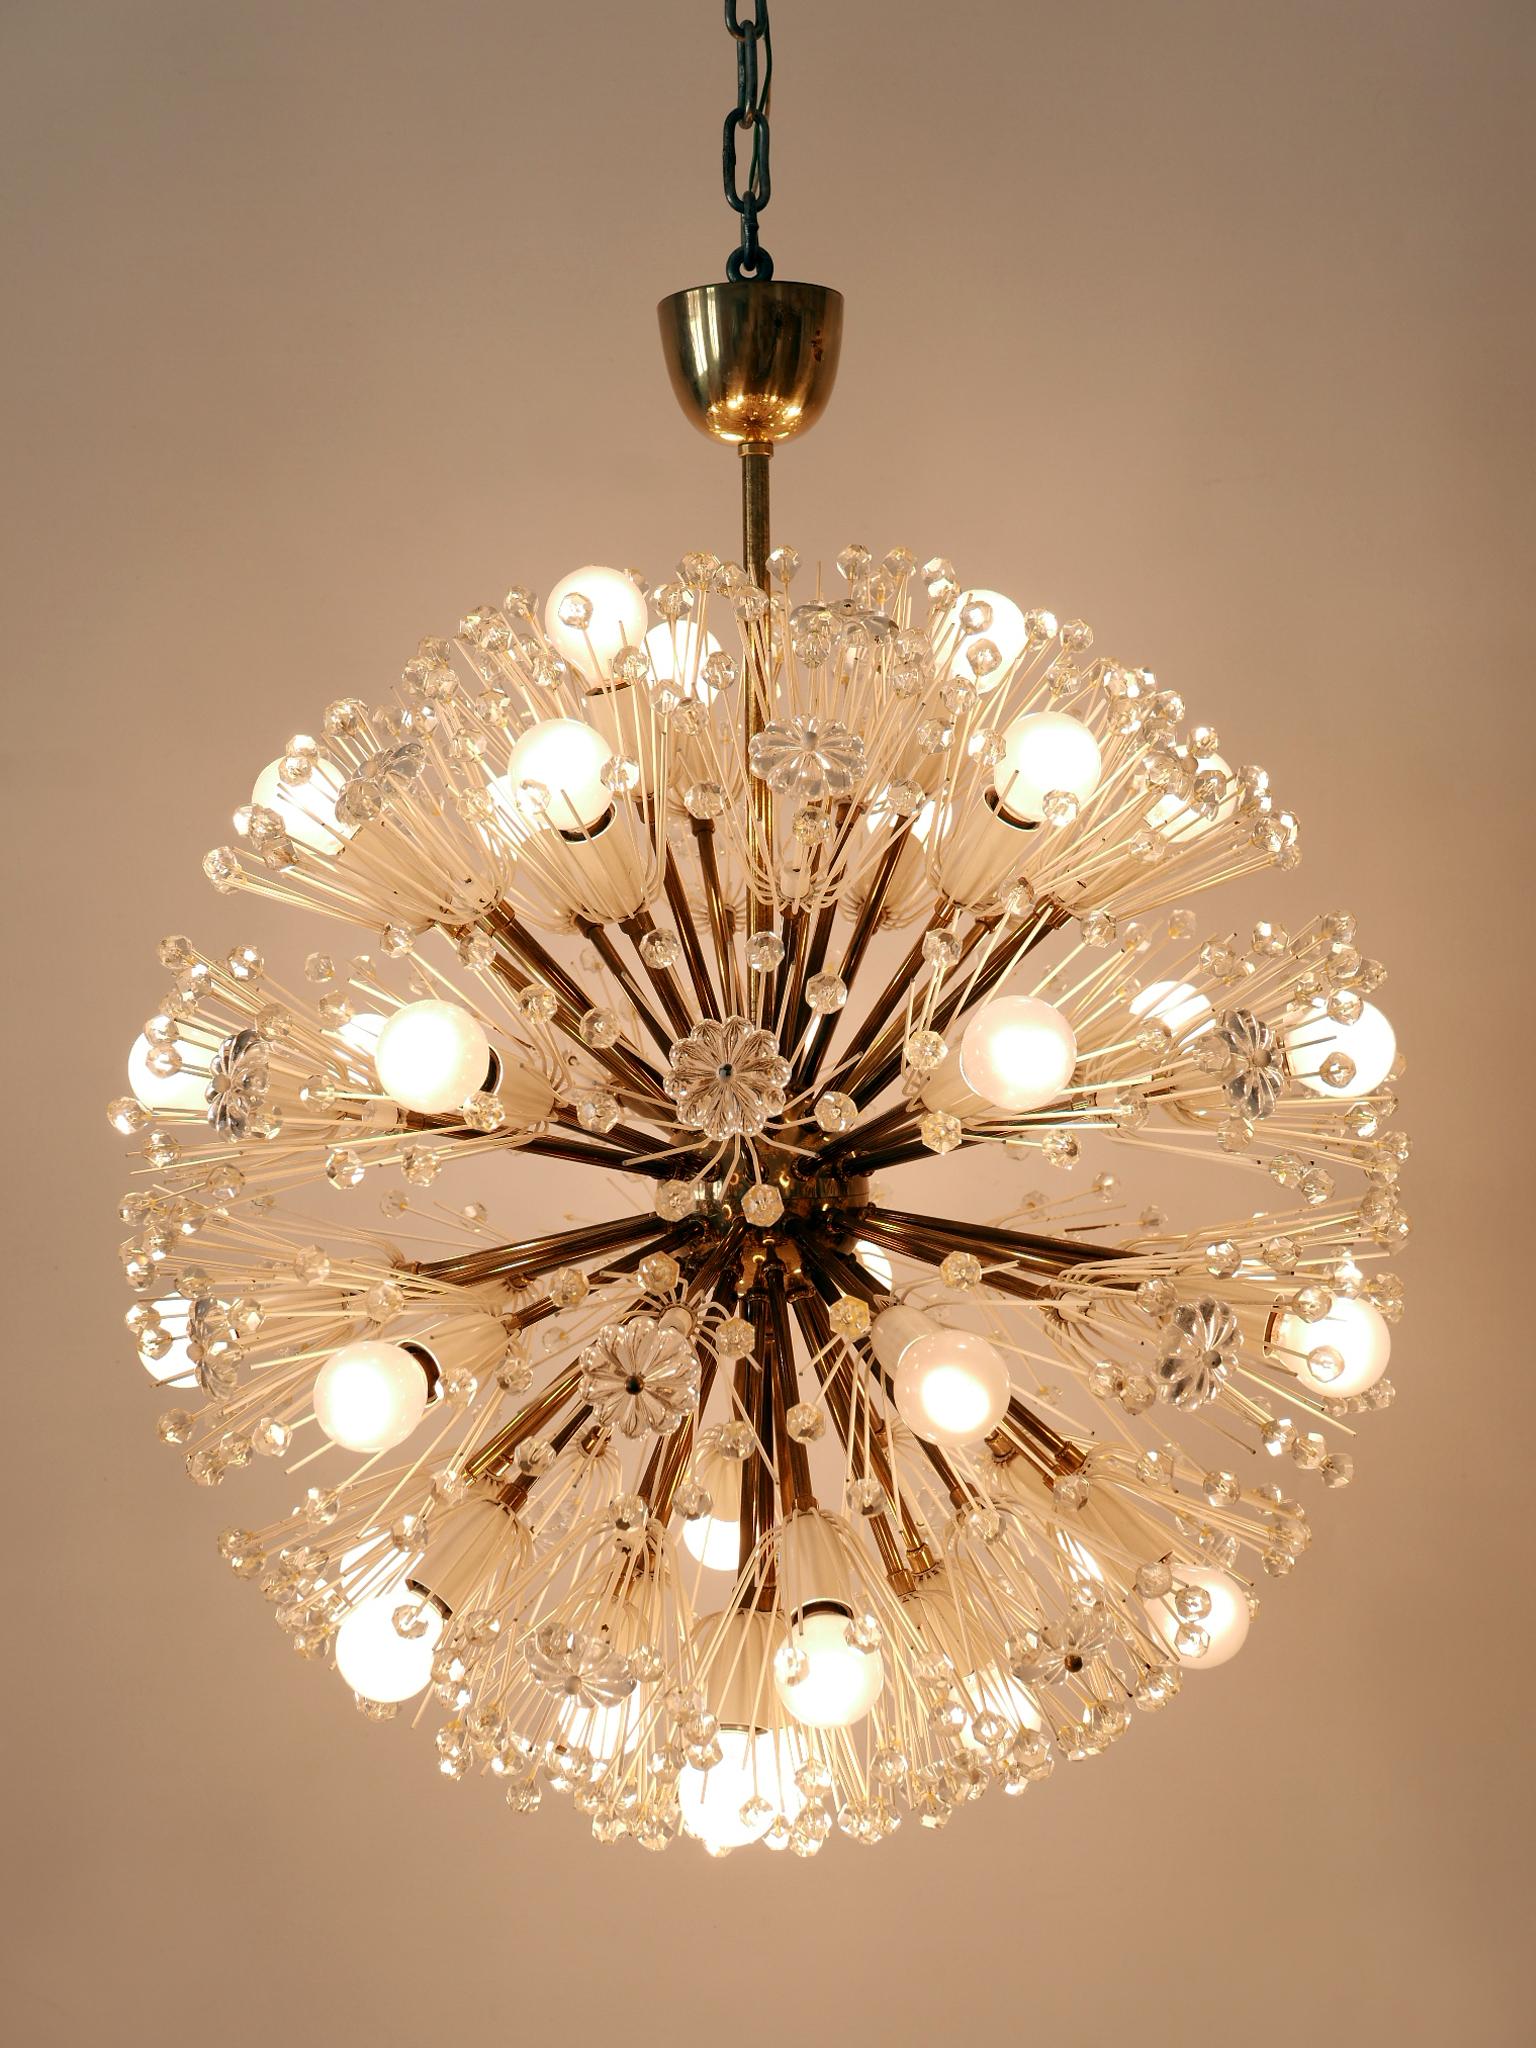 A breath taking light object. Rare, lovely and highly decorative Mid-Century Modern 33-flamed sputnik chandelier 'dandelion'. Designed by Emil Stejnar for Rupert Nikoll, Austria, 1950s.

Executed in brass, glass pearls and flowers, the chandelier